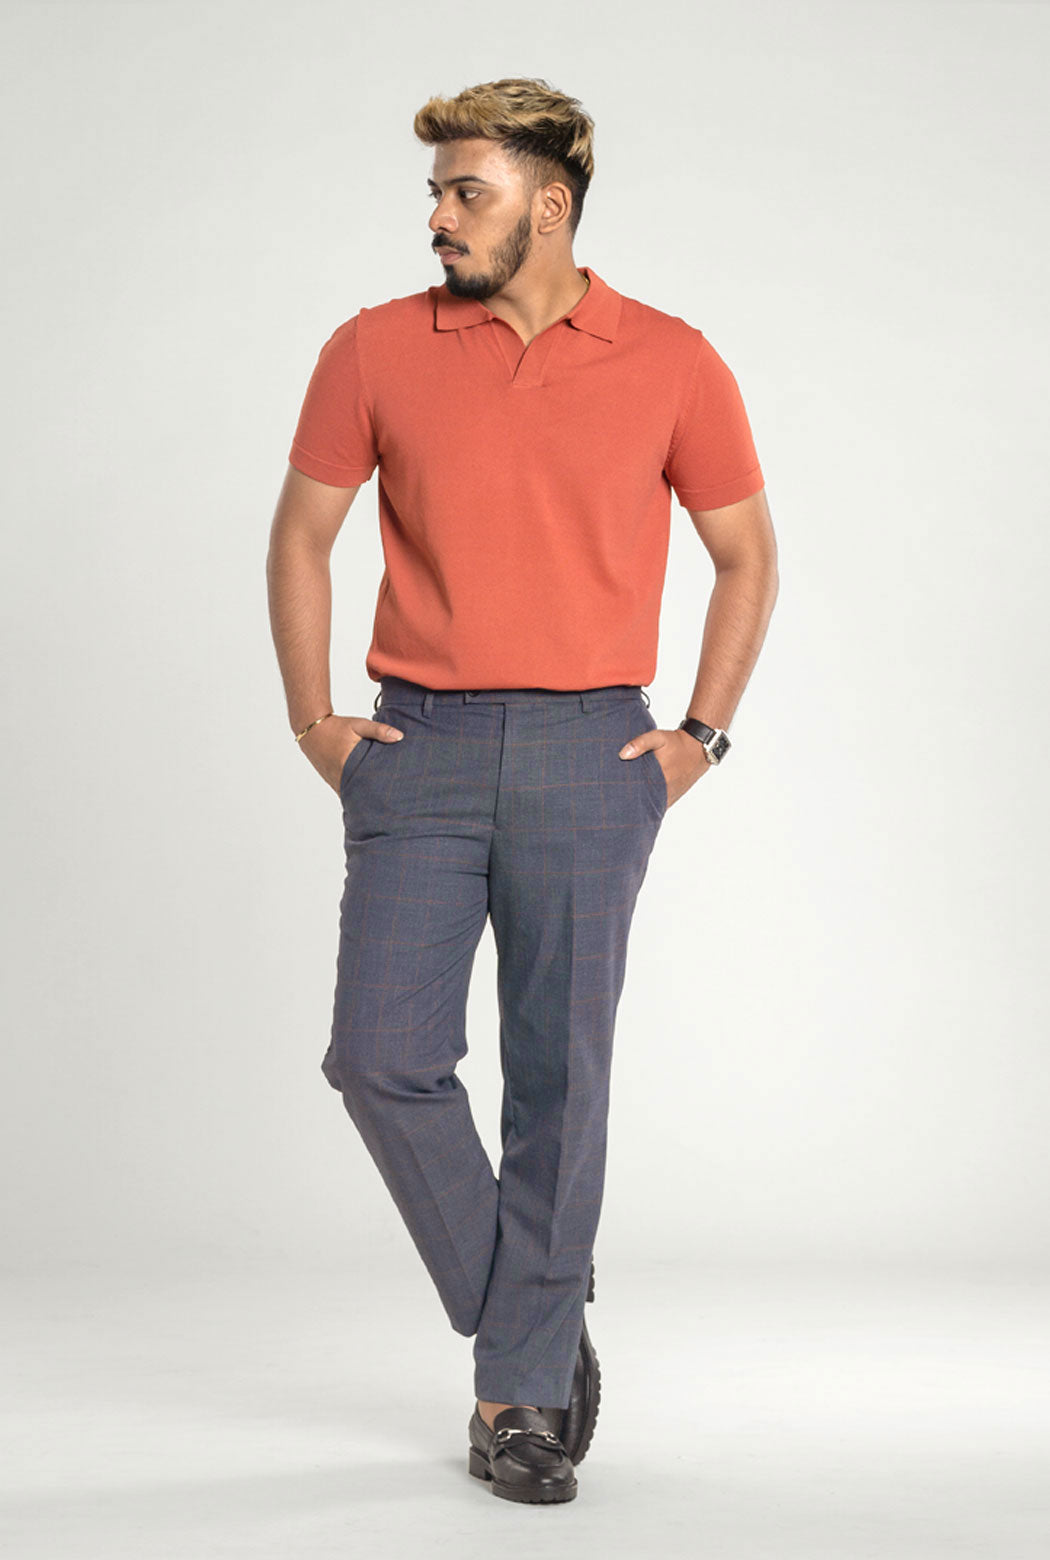 Knit  Polo Tee - Salmon Pink Open Collar - Zeve Shoes